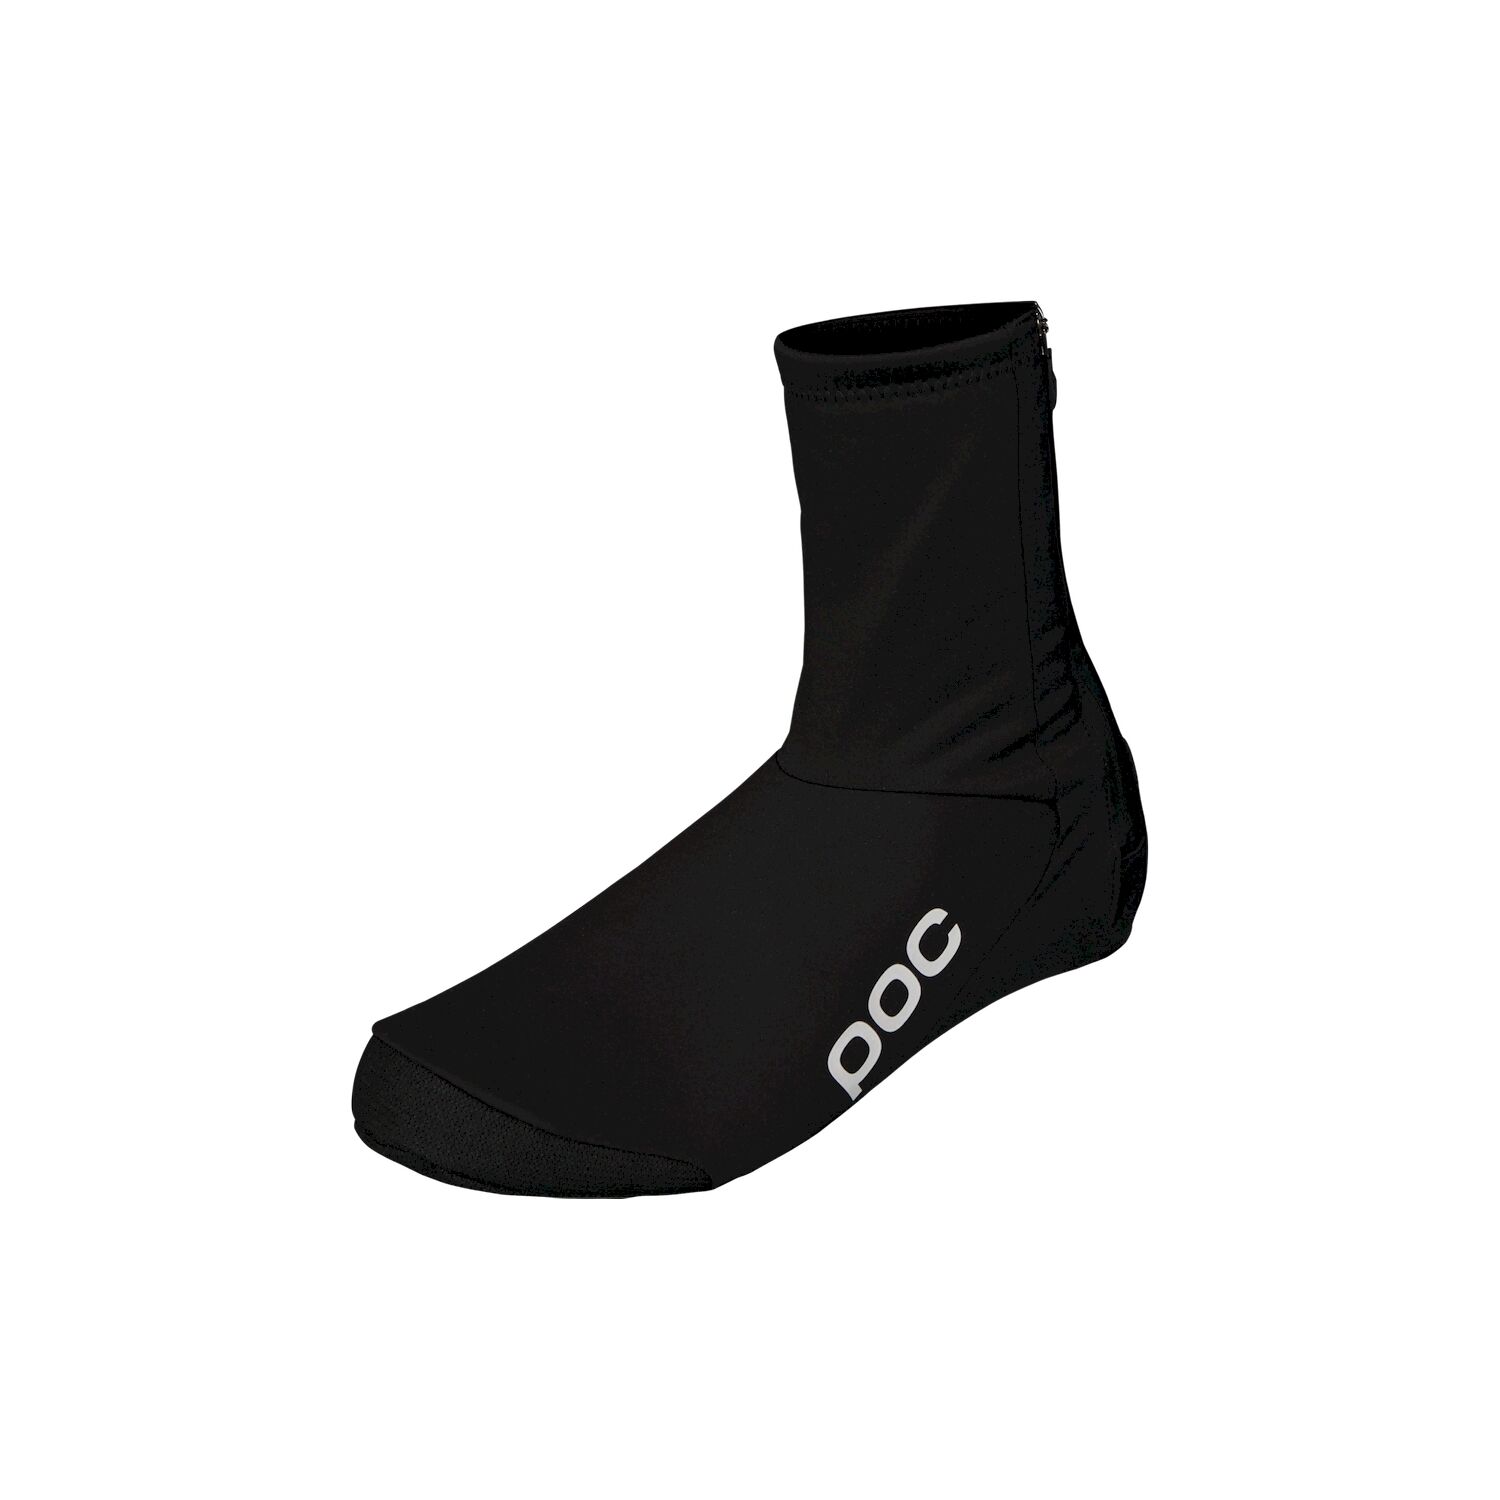 Poc Thermal Heavy Bootie - Sur-chaussures vélo | Hardloop